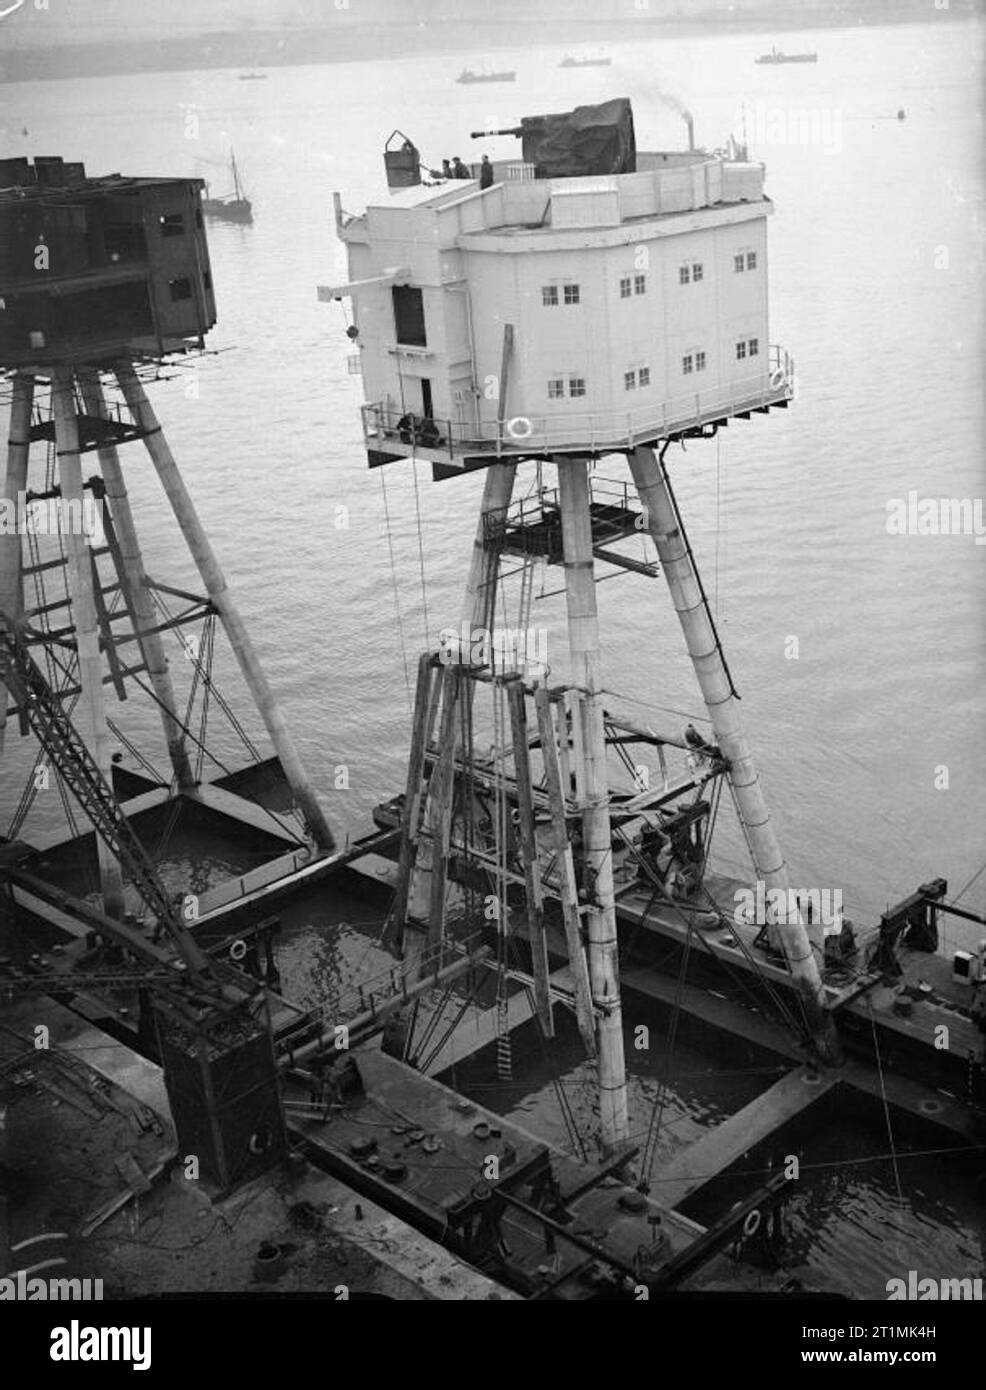 The Royal Navy during the Second World War 120 foot Maunsell anti-aircraft forts for use in the Mersey Estuary under construction at Bromborough Dock. Here they are well on the way to completion with the accommodation block fitted to the four long legs that will rest on the sea bed. Stock Photo